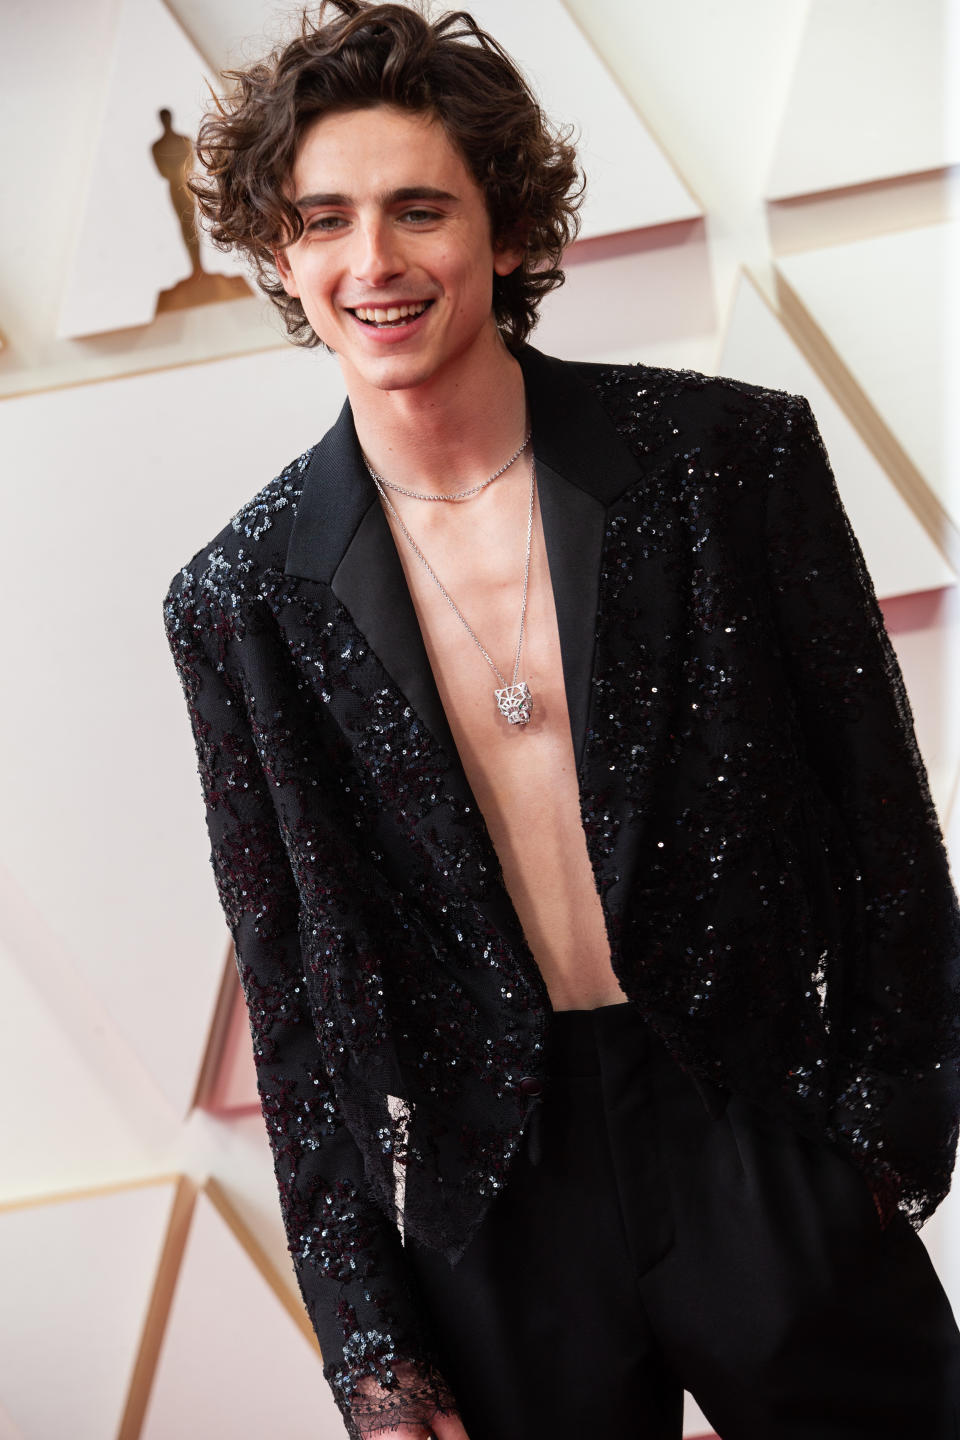 Timothée Chalamet at the 94th Academy Awards held at Dolby Theatre at the Hollywood & Highland Center on March 27th, 2022 in Los Angeles, California.